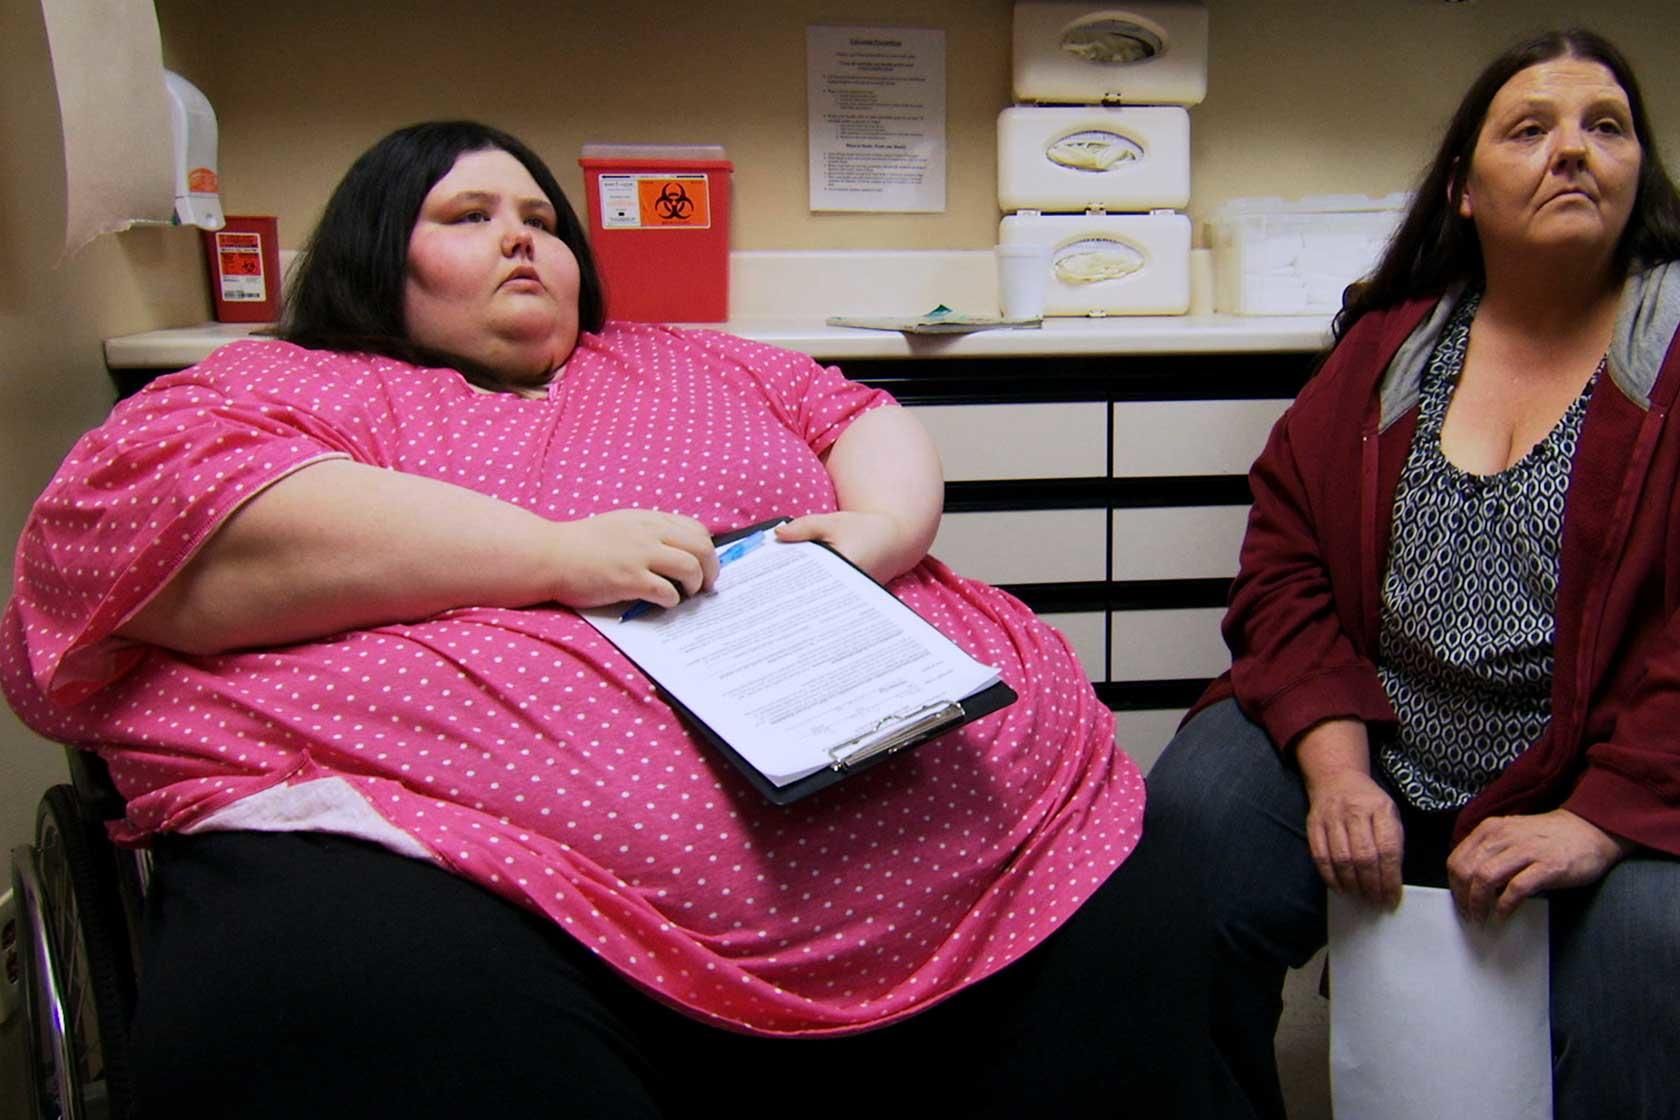 8 Secrets From "My 600lb Life" That Don't Fit In A 1200 Calorie Diet